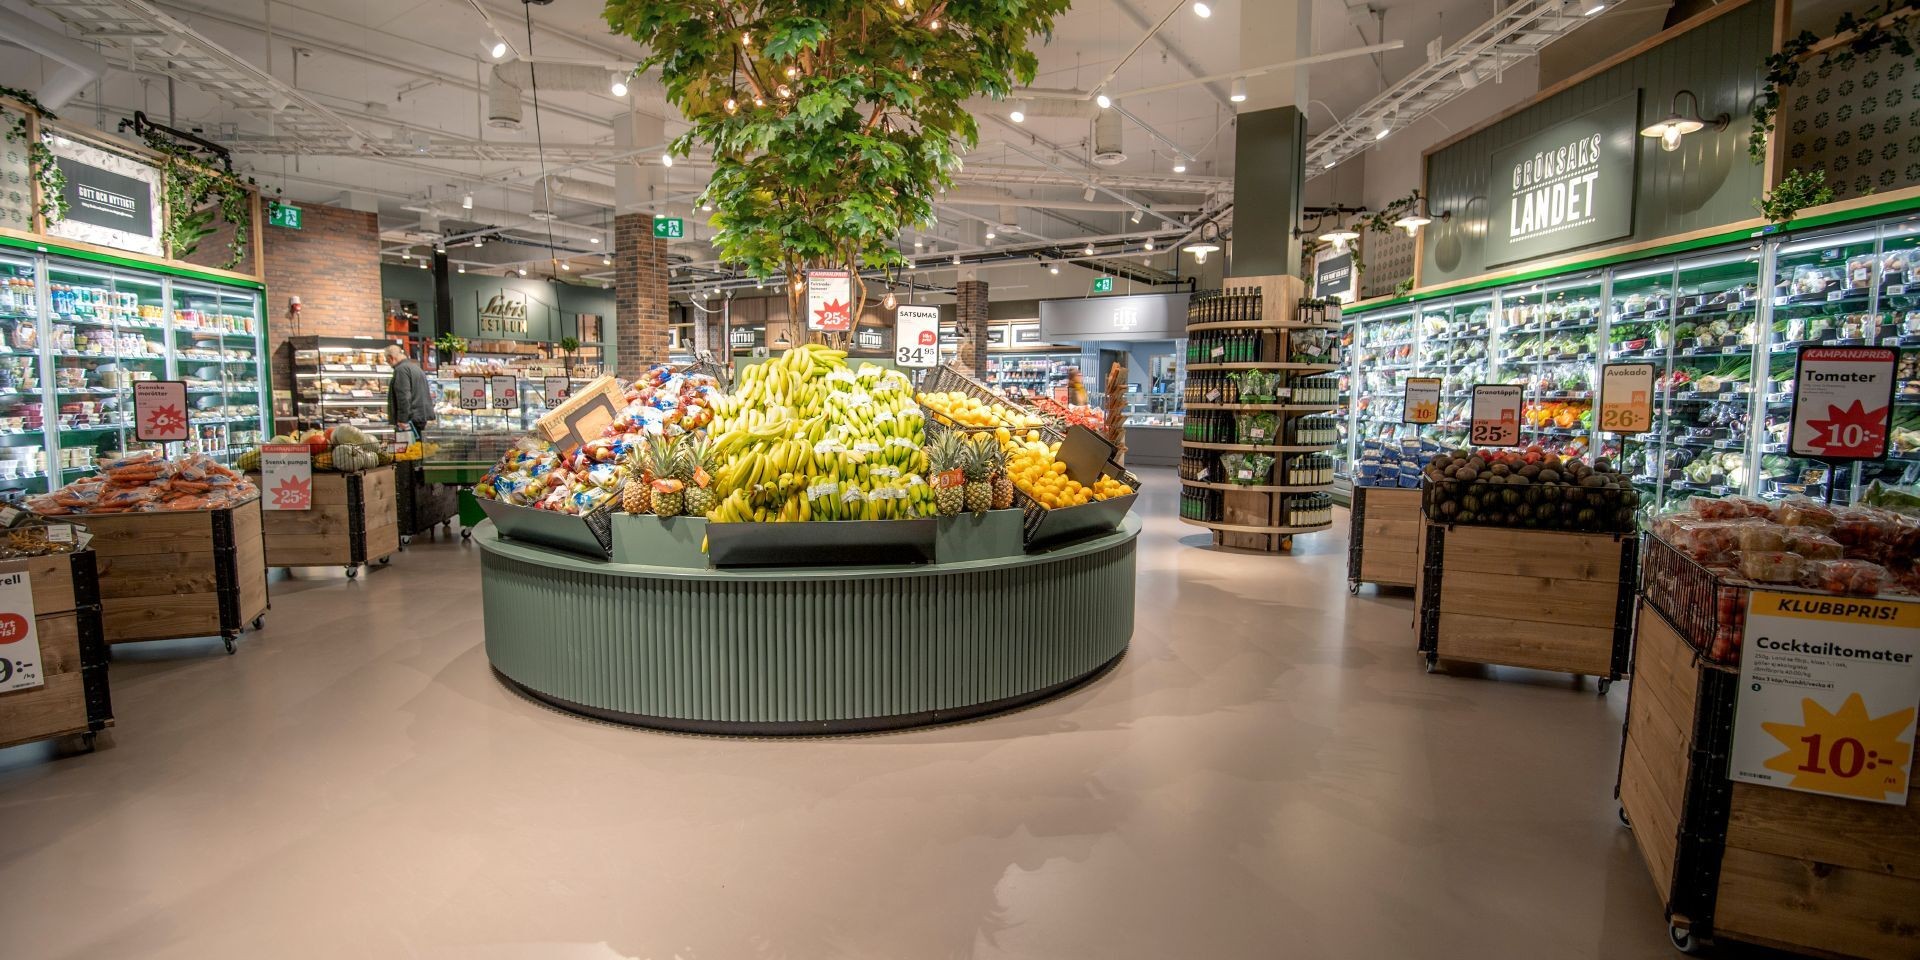 For Hemköp, sustainable shopping starts with sustainable flooring